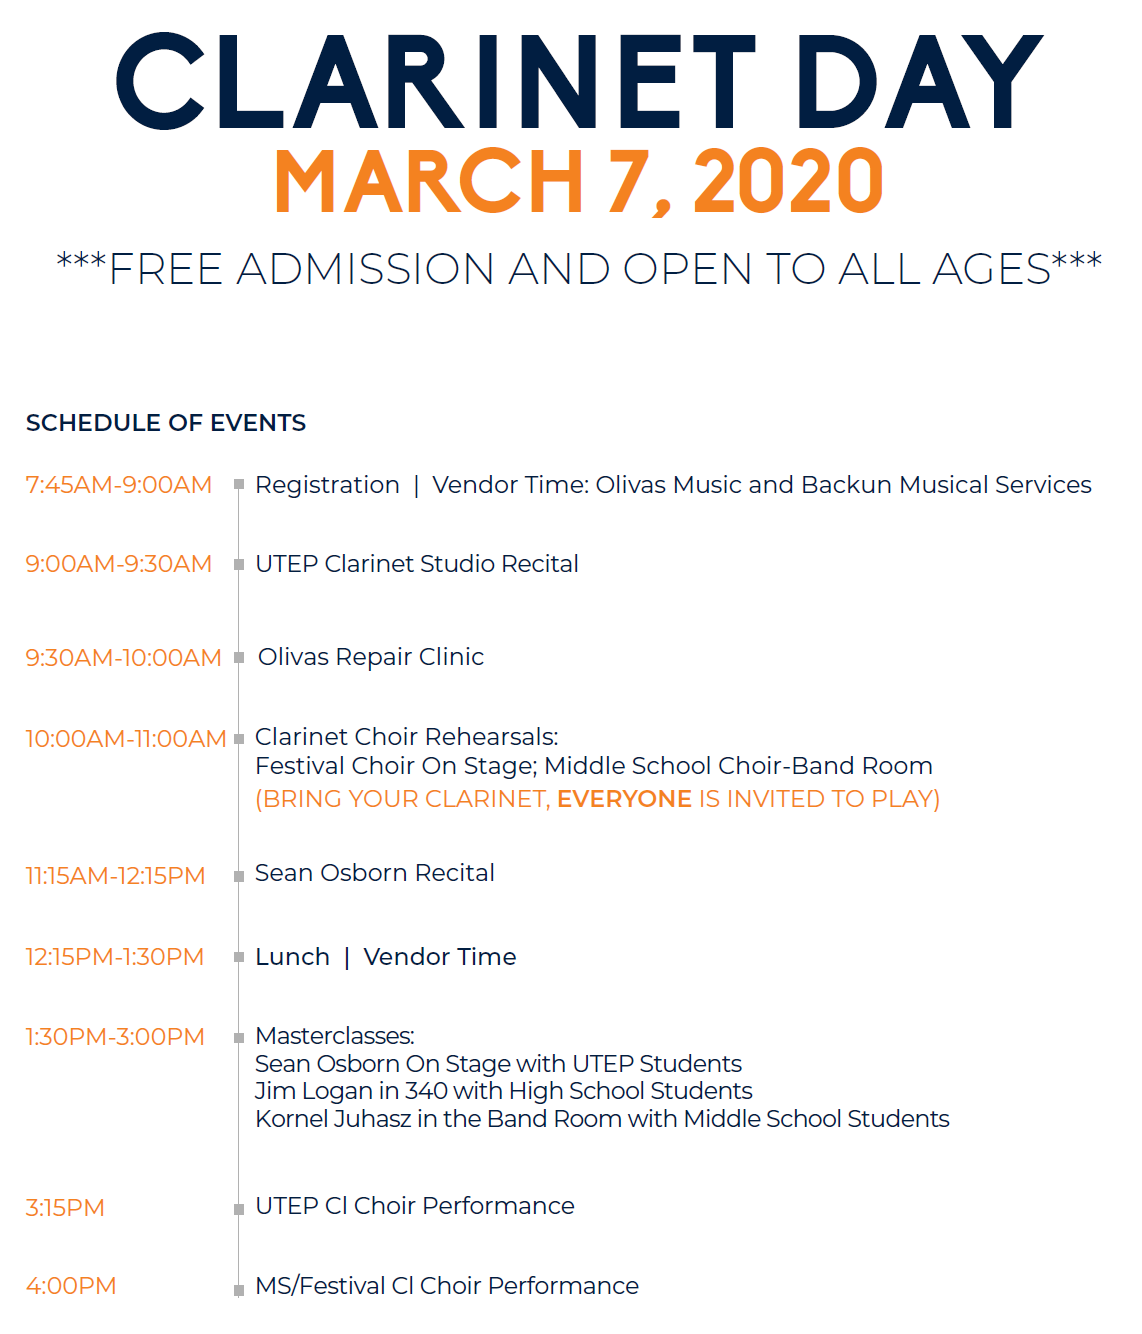 clarinet day schedule of events 2020